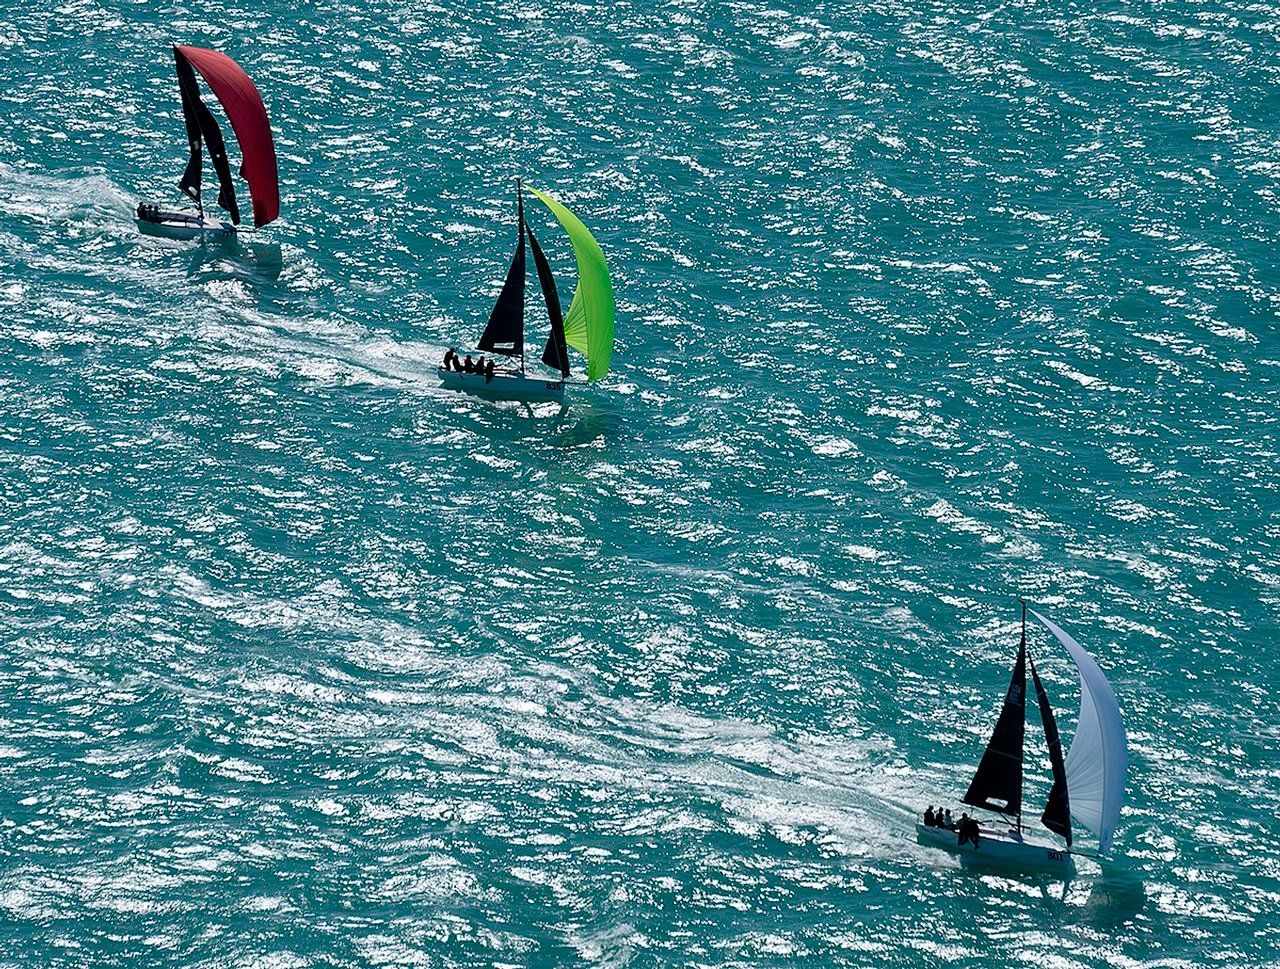 Top sailing teams from around the world are competing in azure waters through Jan. 21. Image: Rob O'Neal